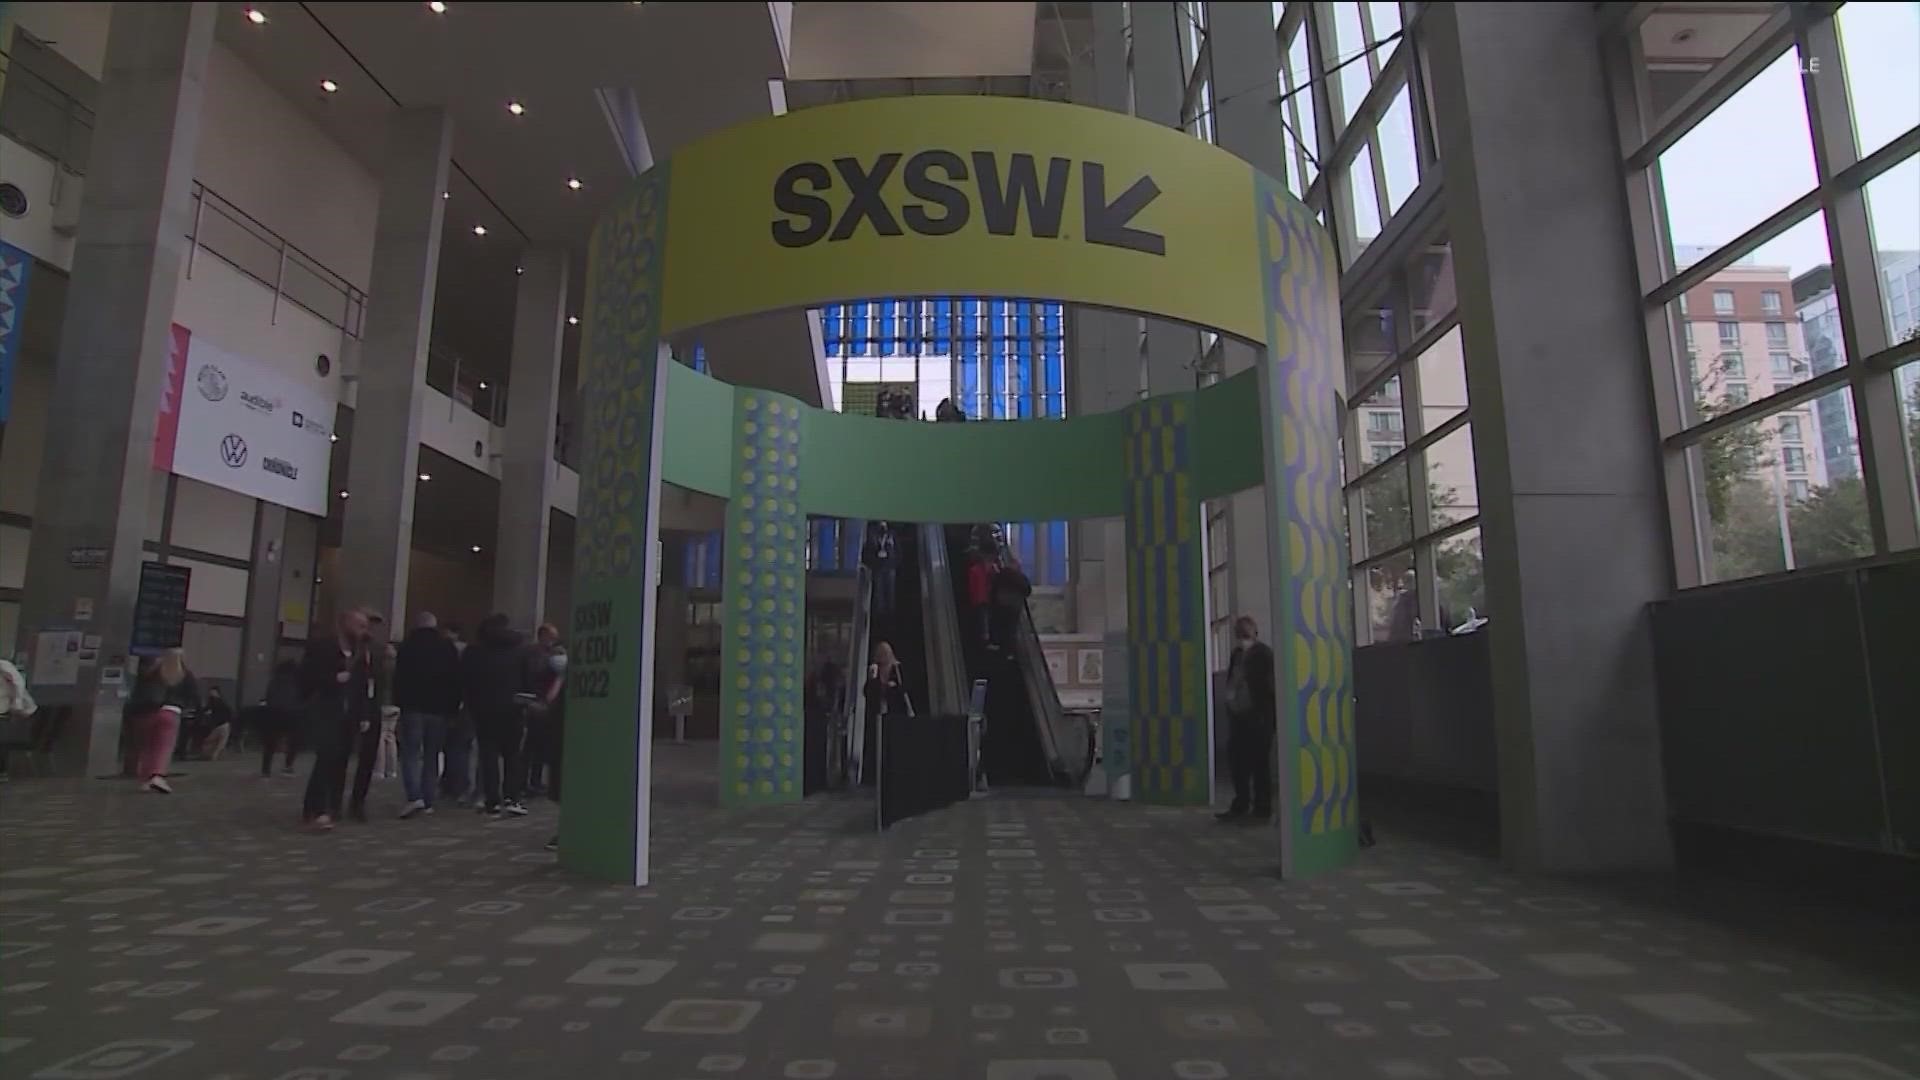 South by Southwest is just a few days away and will bring thousands of visitors to Austin from around the world.